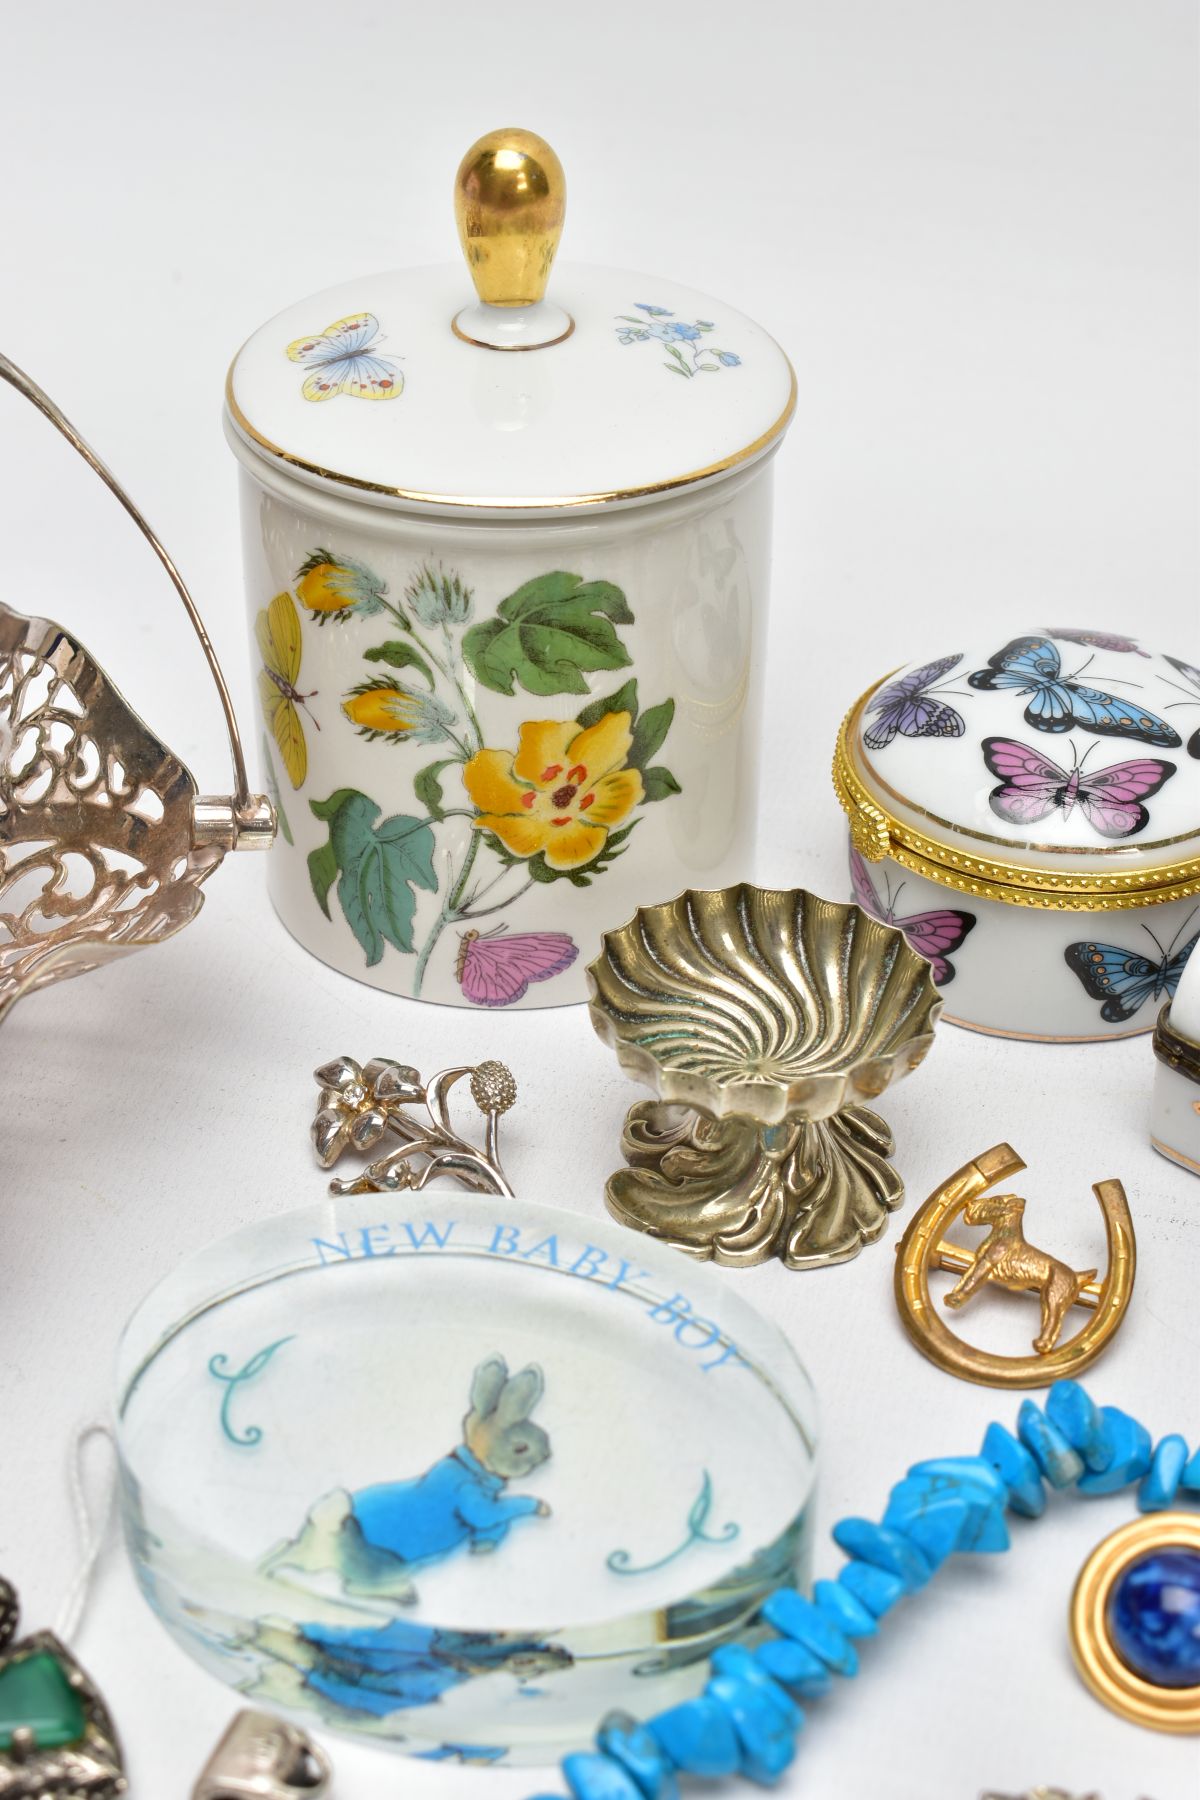 A MIXED TRAY OF CERAMICS, METALWARE AND COSTUME JEWELLERY, to include a Portmerion lidded jar with - Image 4 of 9